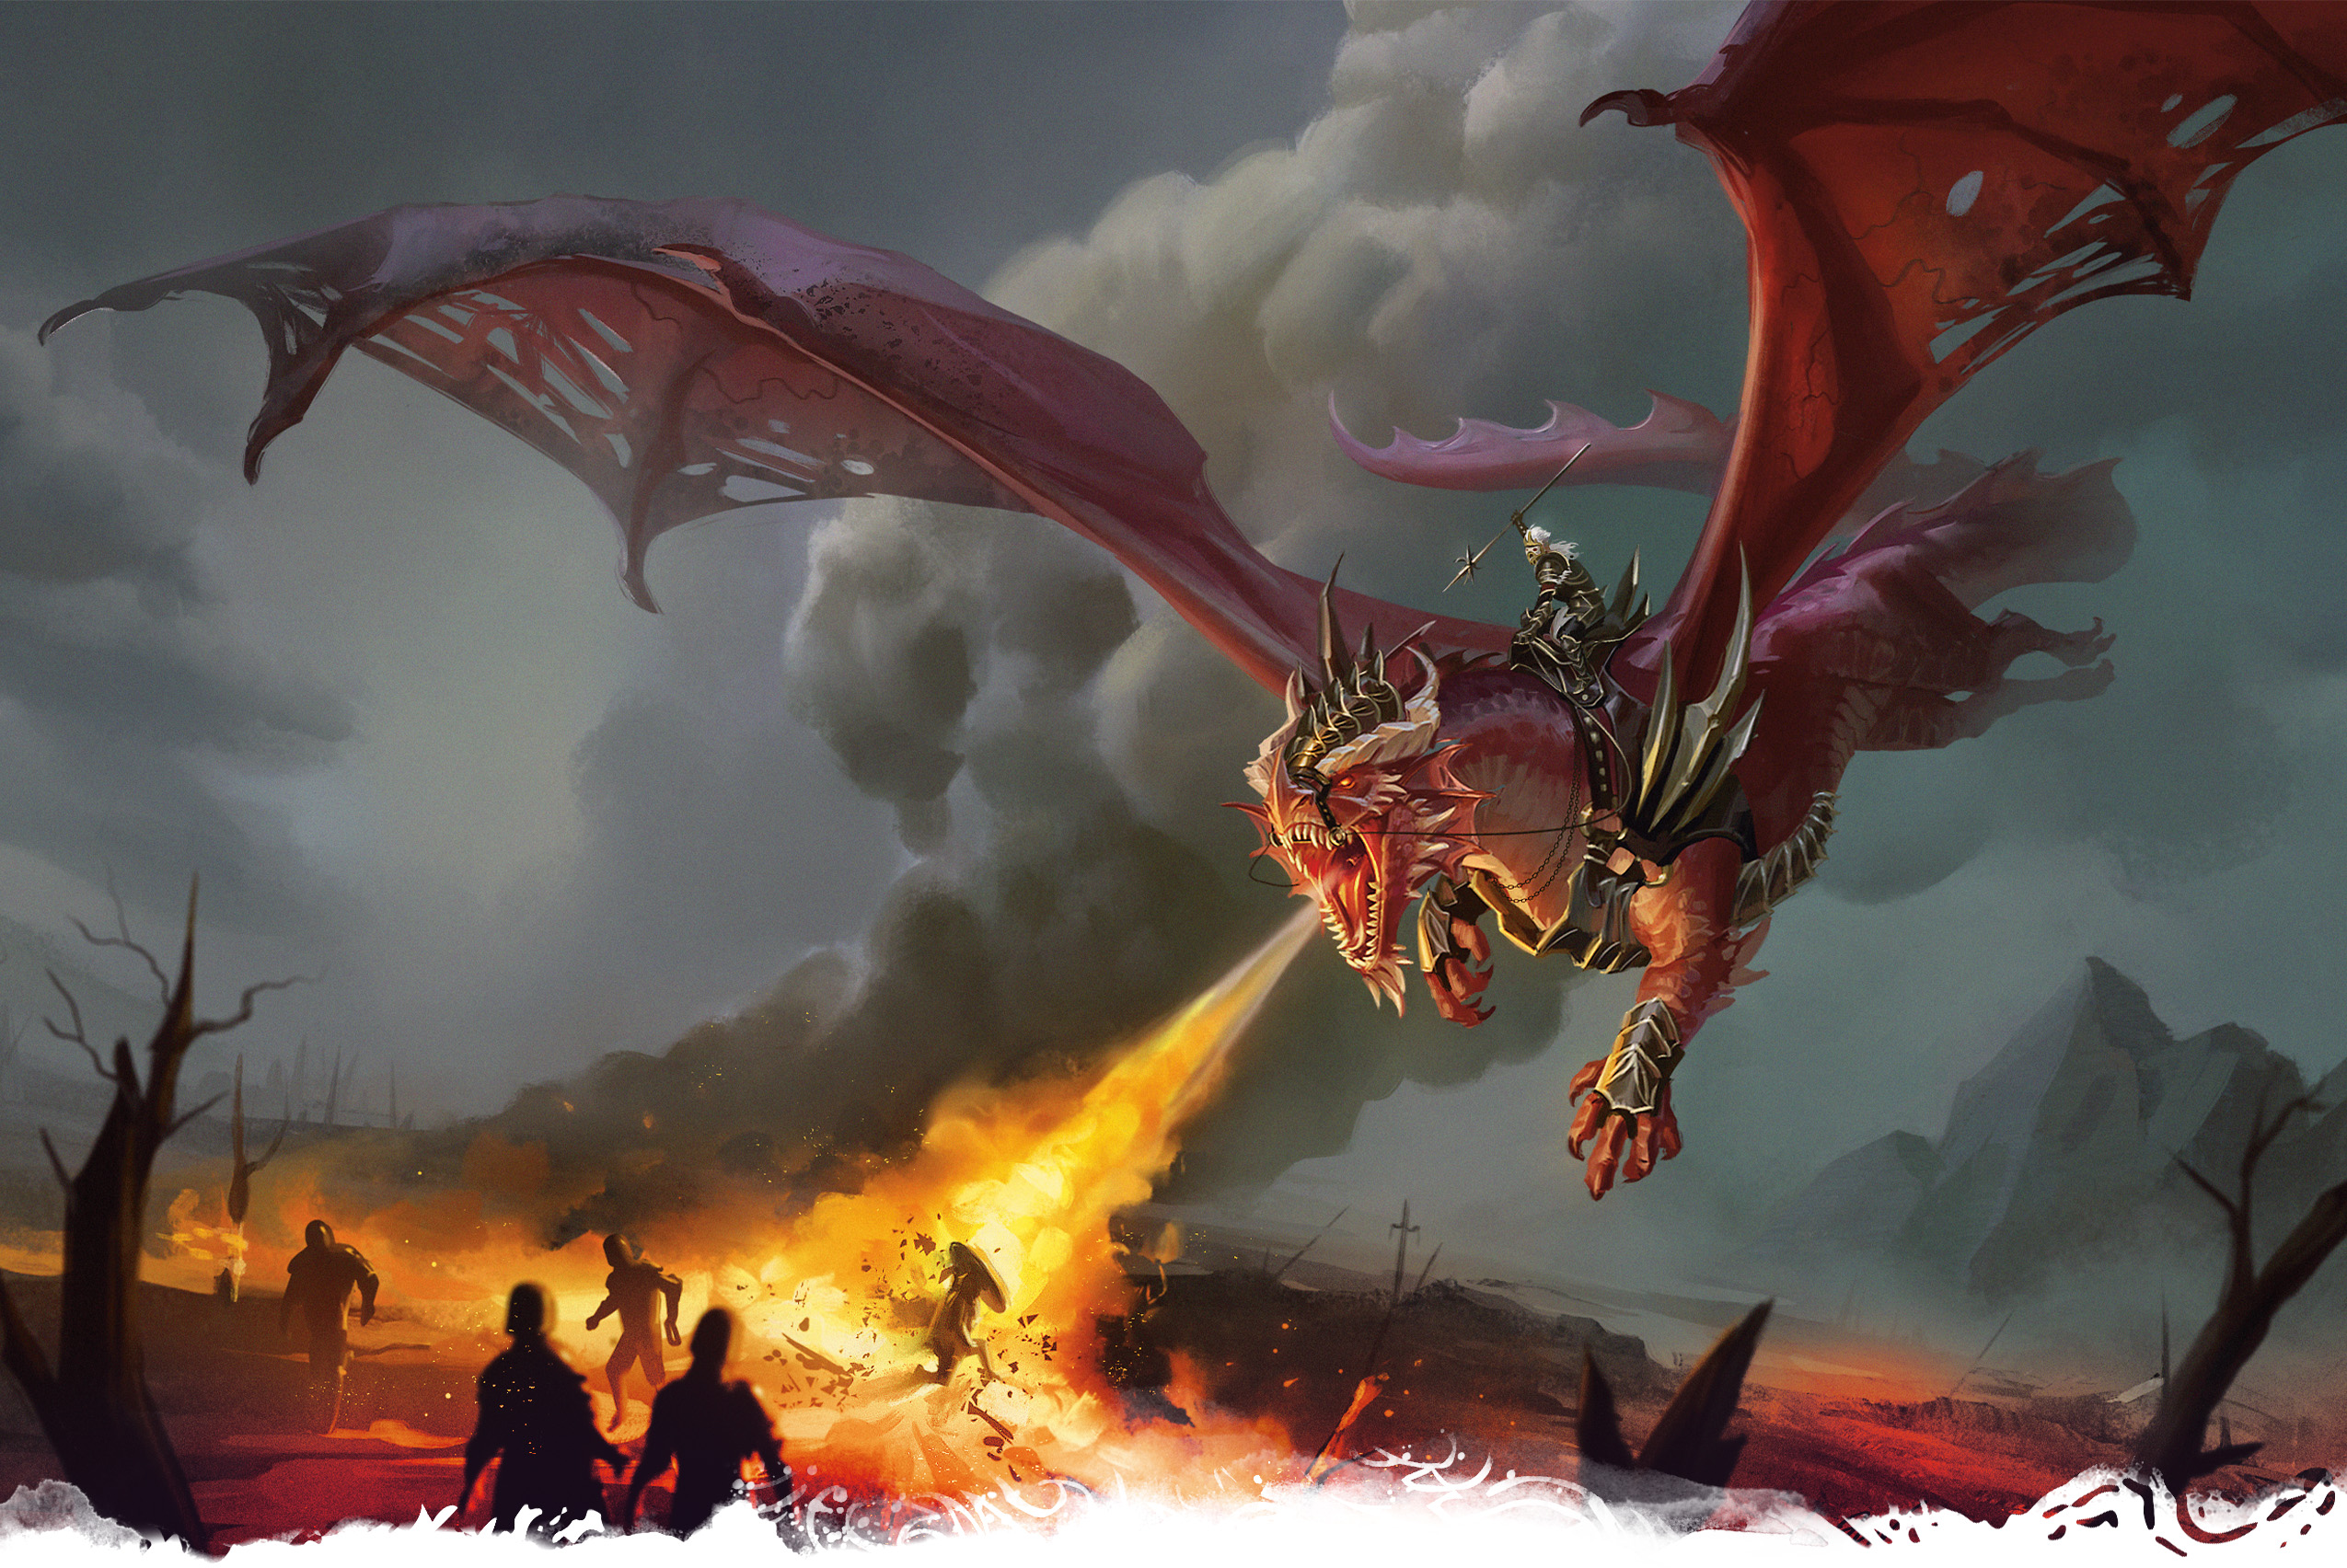 A dragon scorches the ground, its rider — lance in hand — bellowing a battle cry.